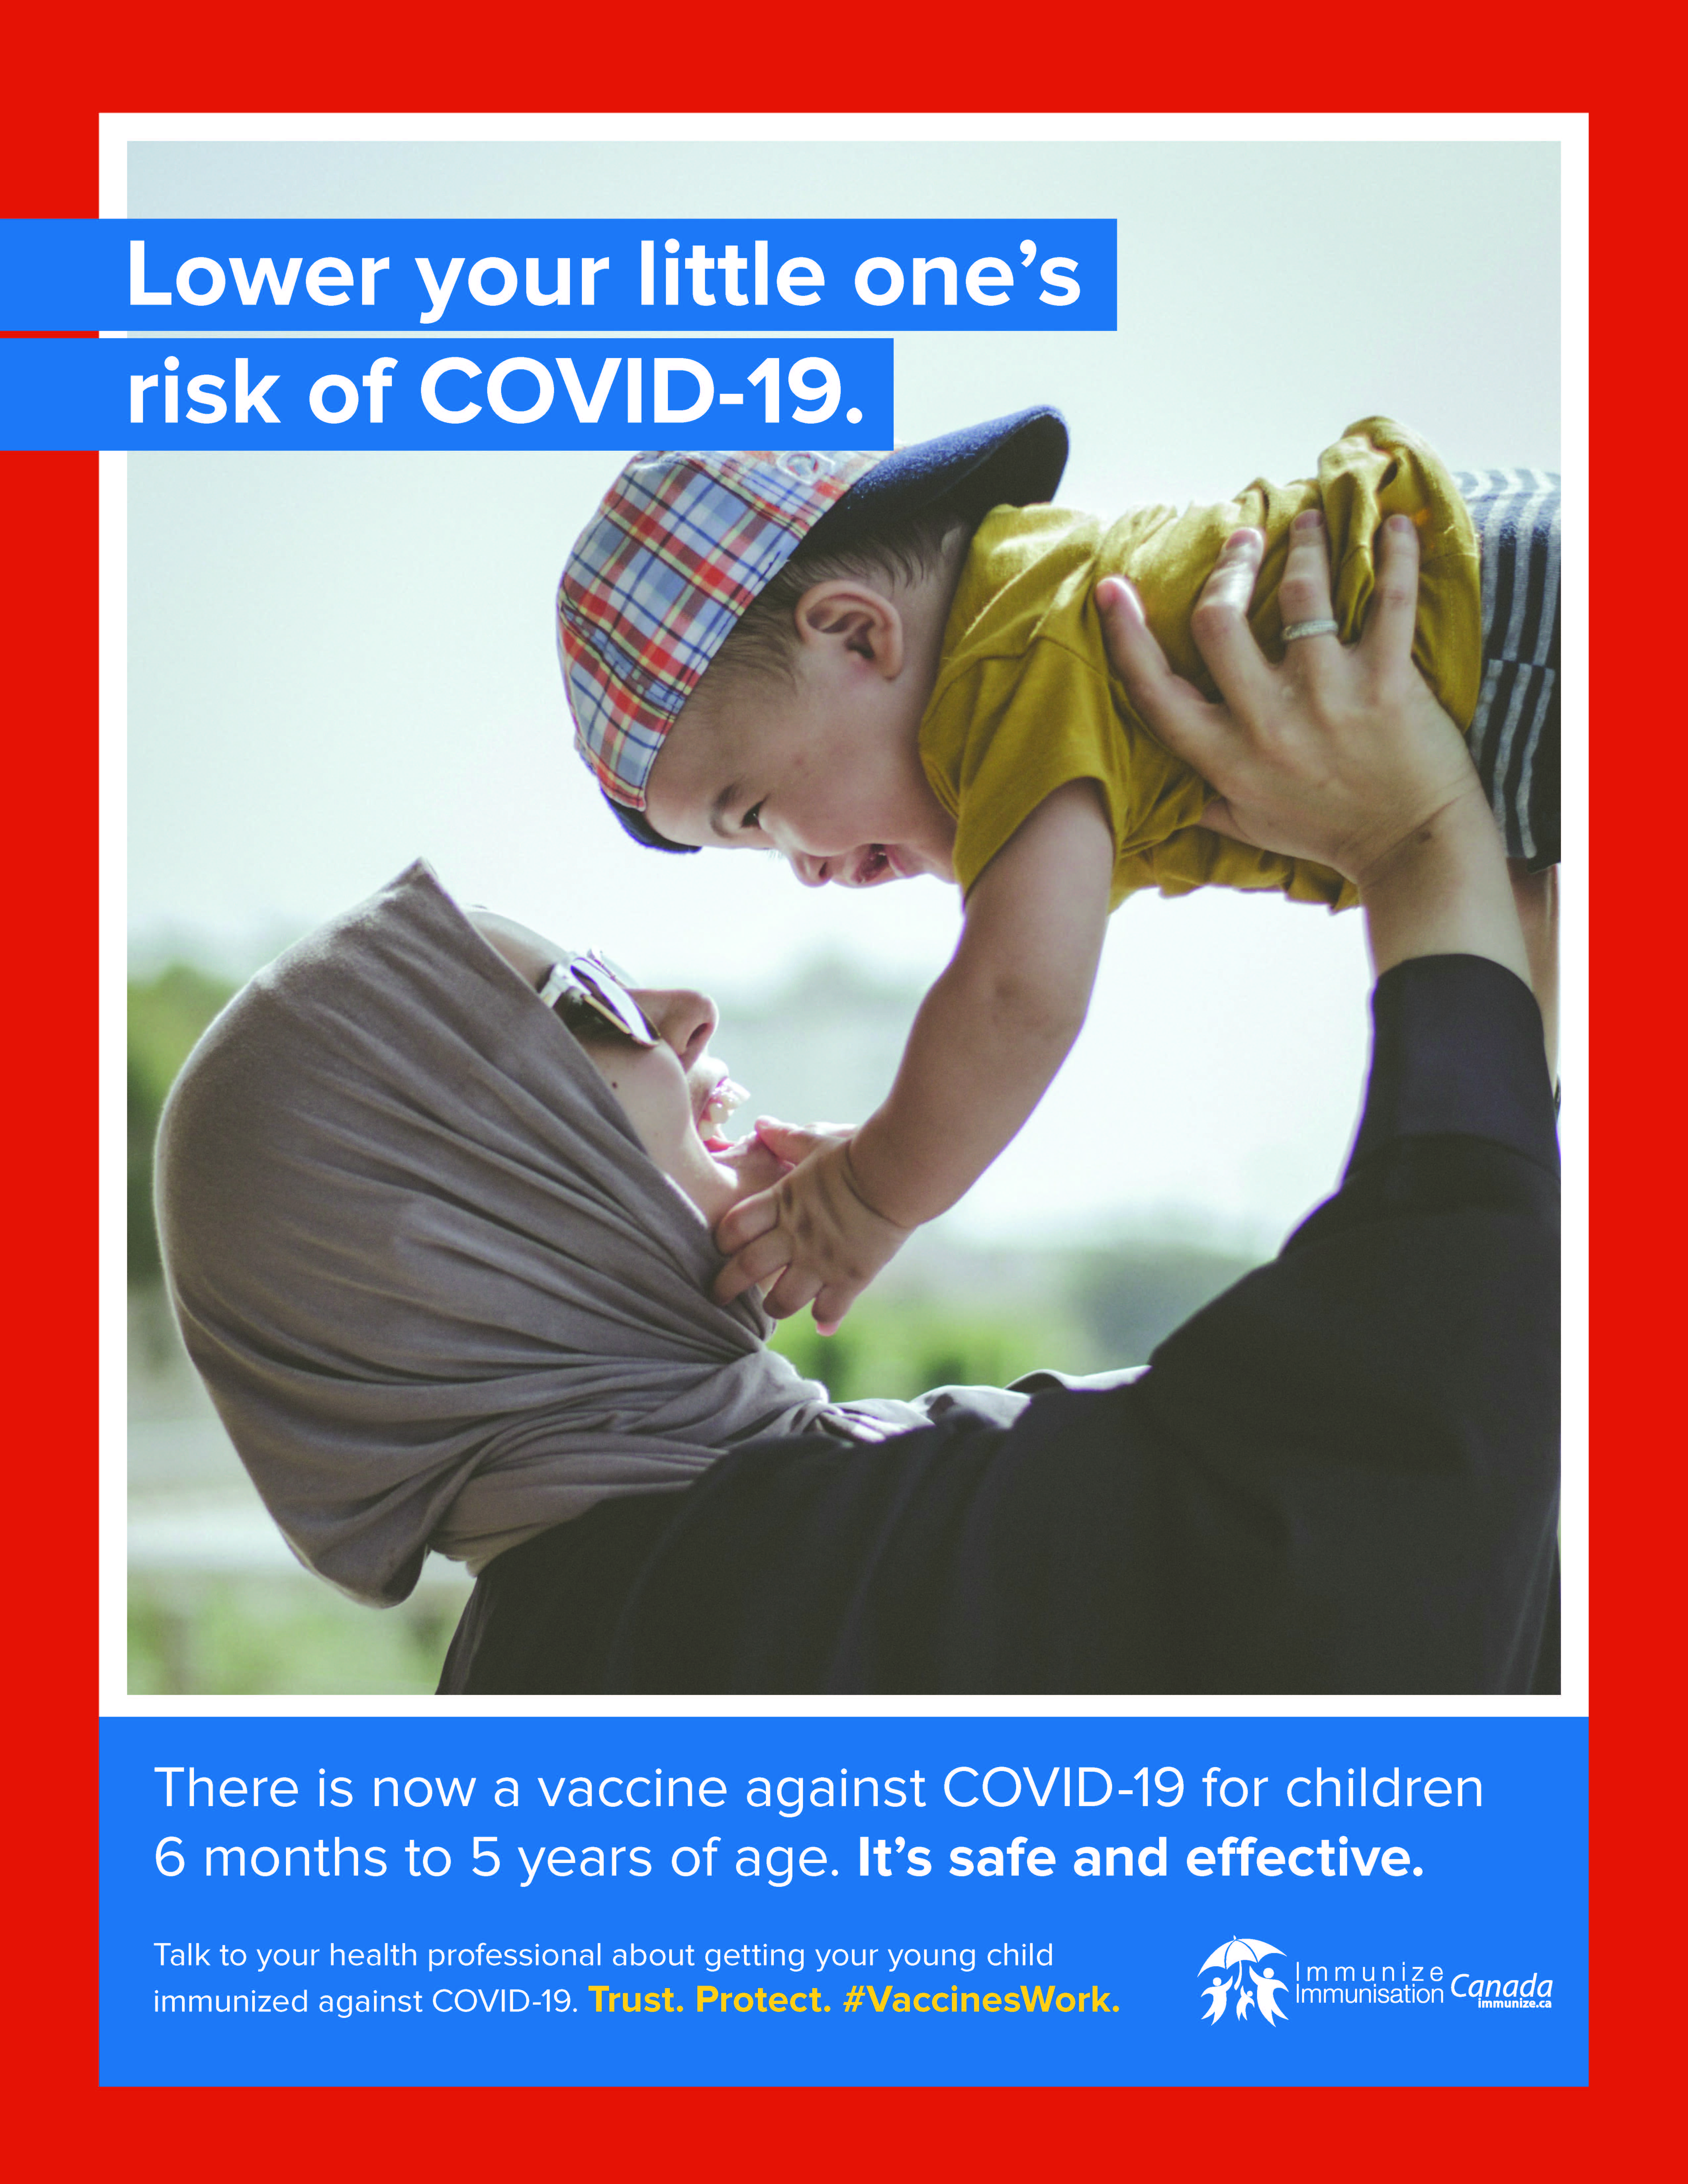 Lower your little one's risk of COVID-19 (poster 3)